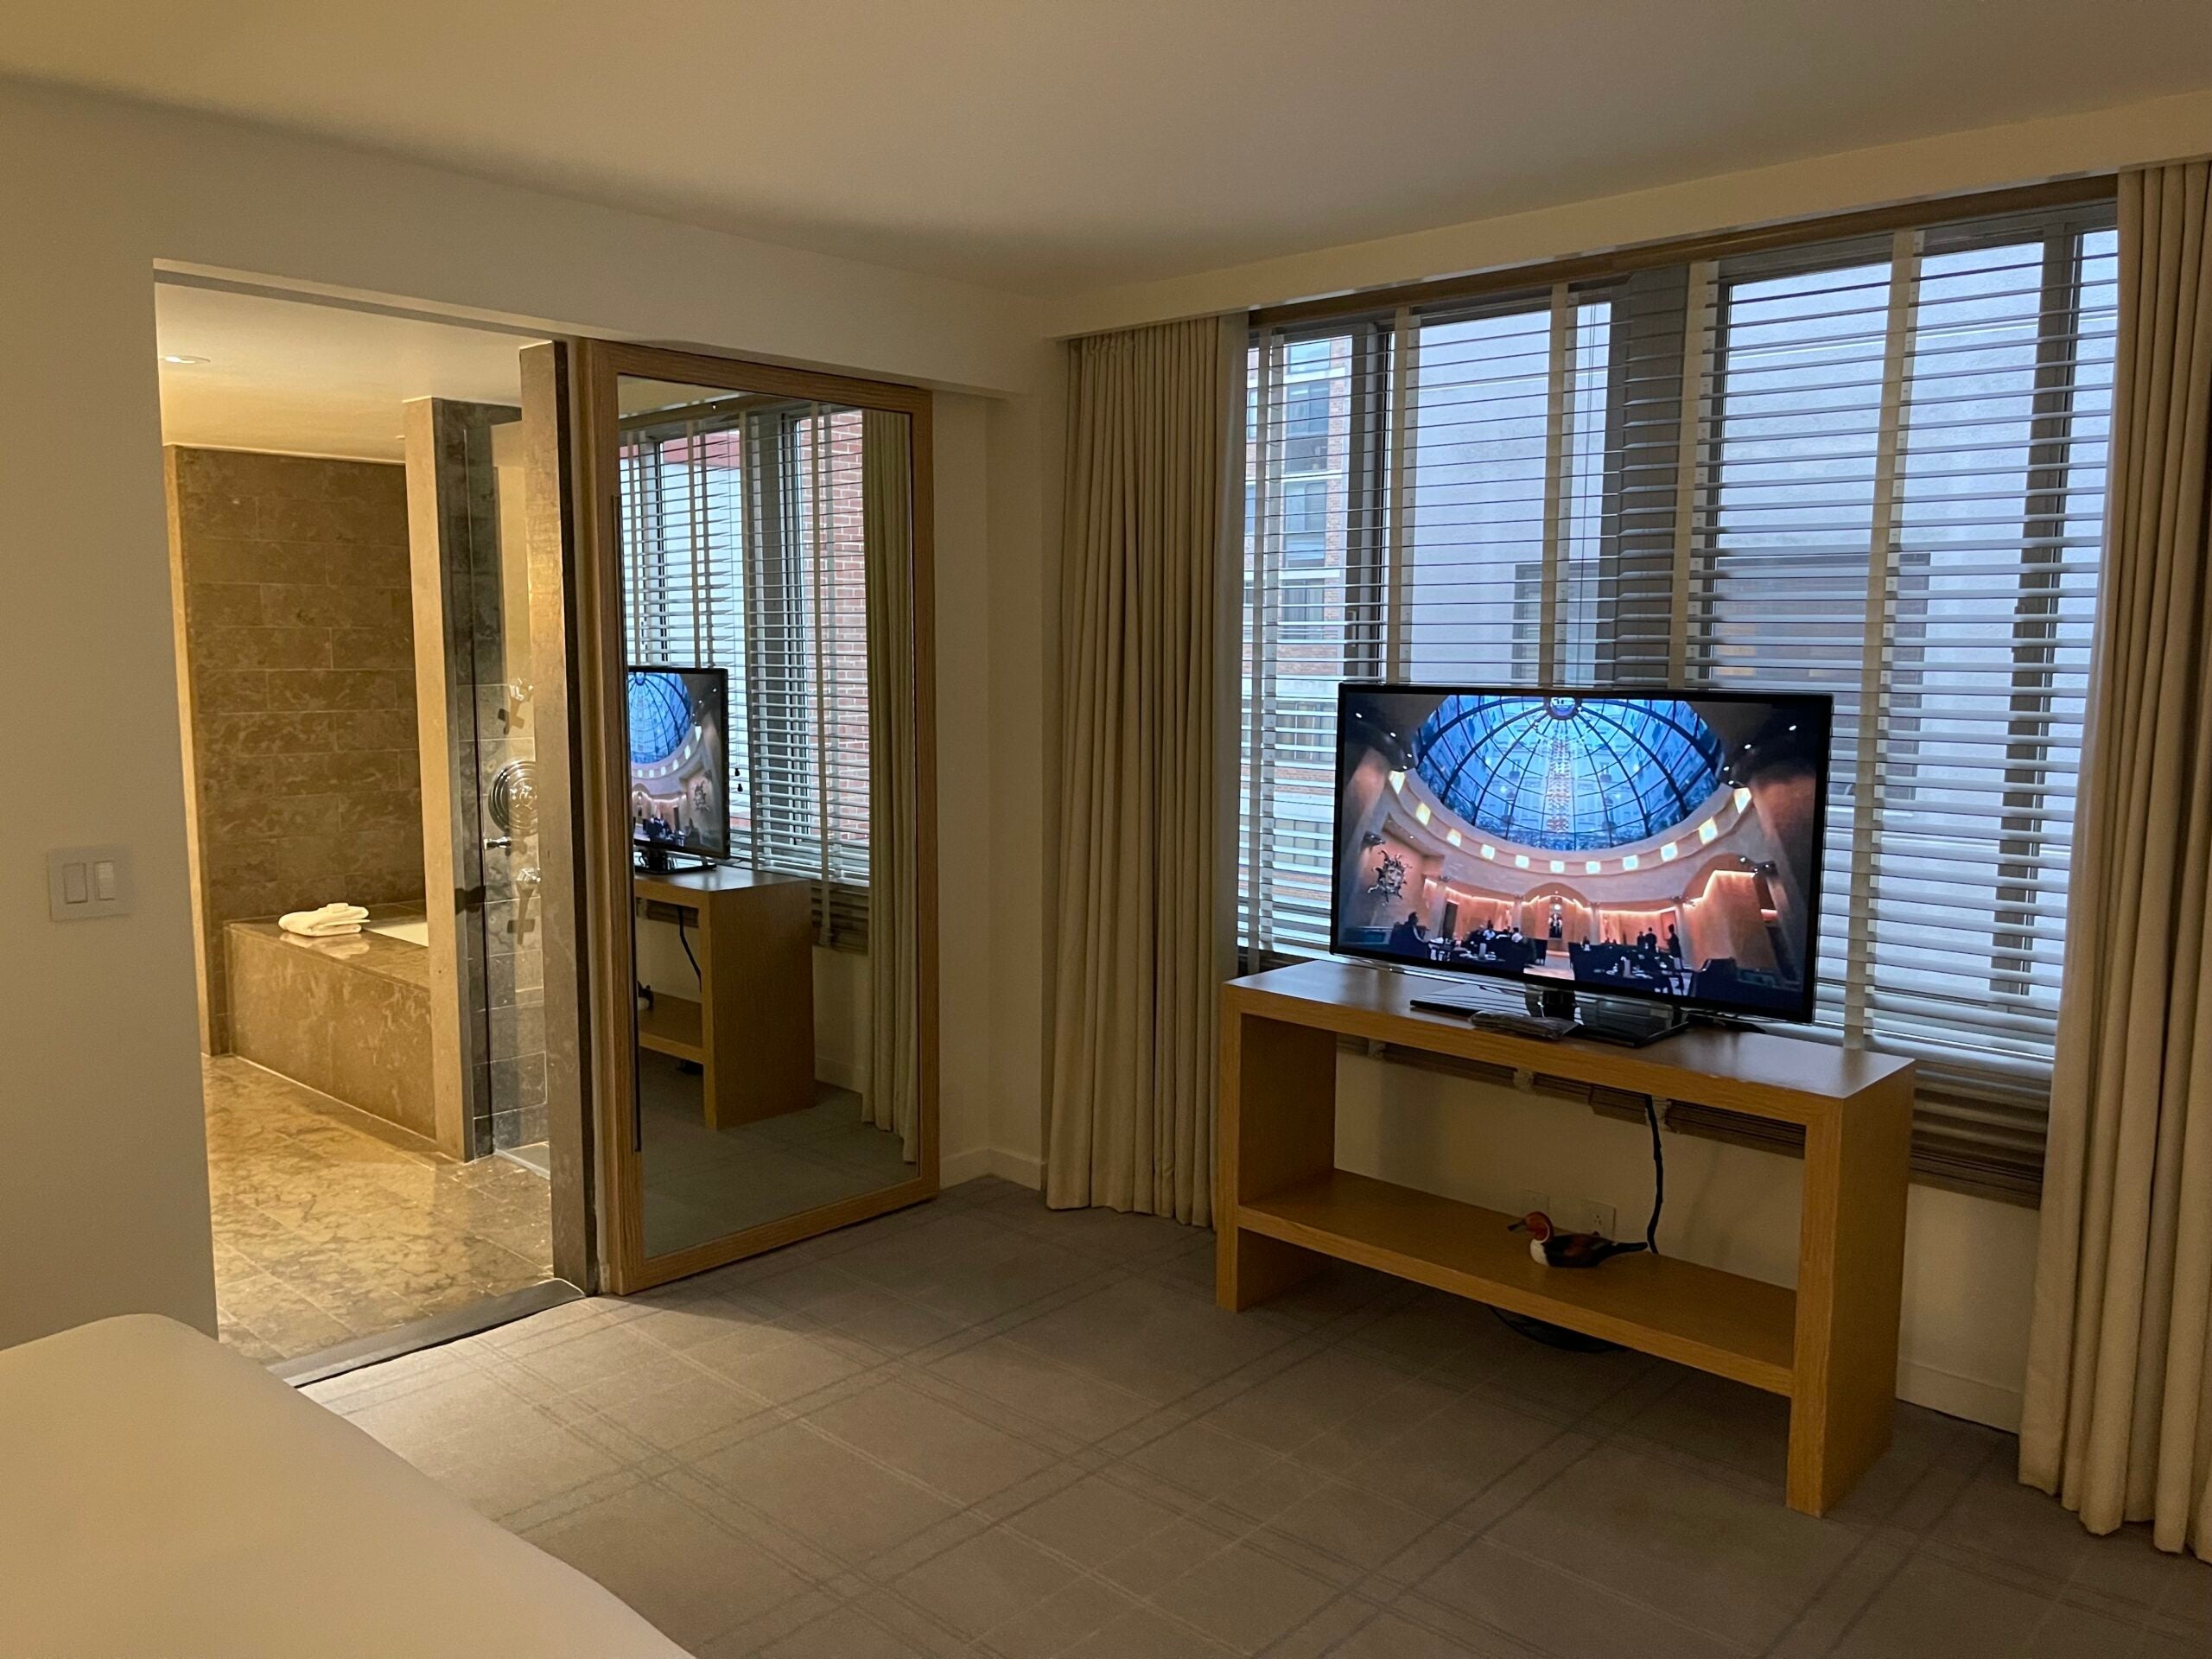 Hyatt Prive: The little-known program that can score you upgrades, breakfast and..